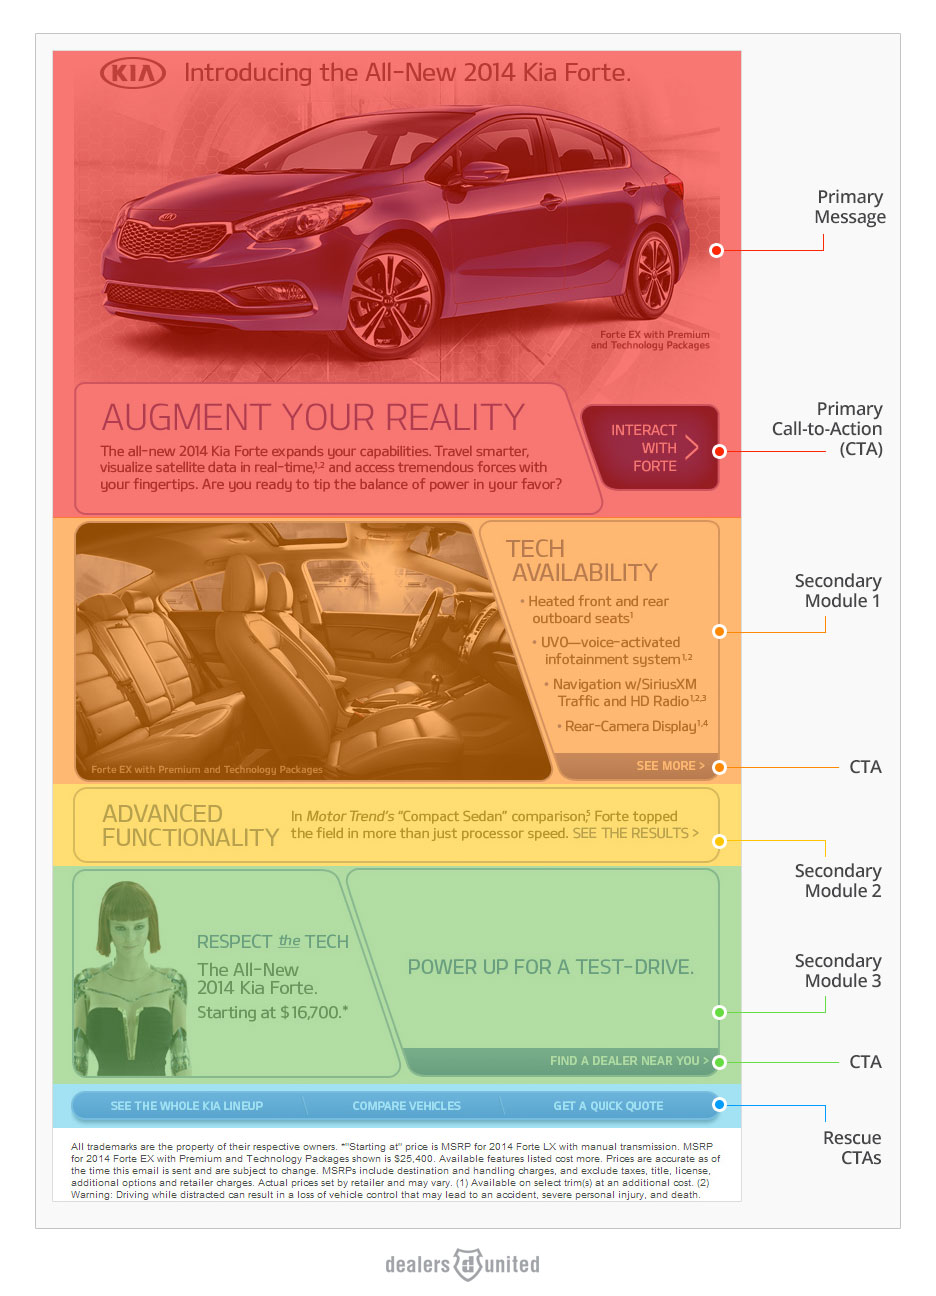 Auto Dealer Email Campaign Primary and Secondary Content